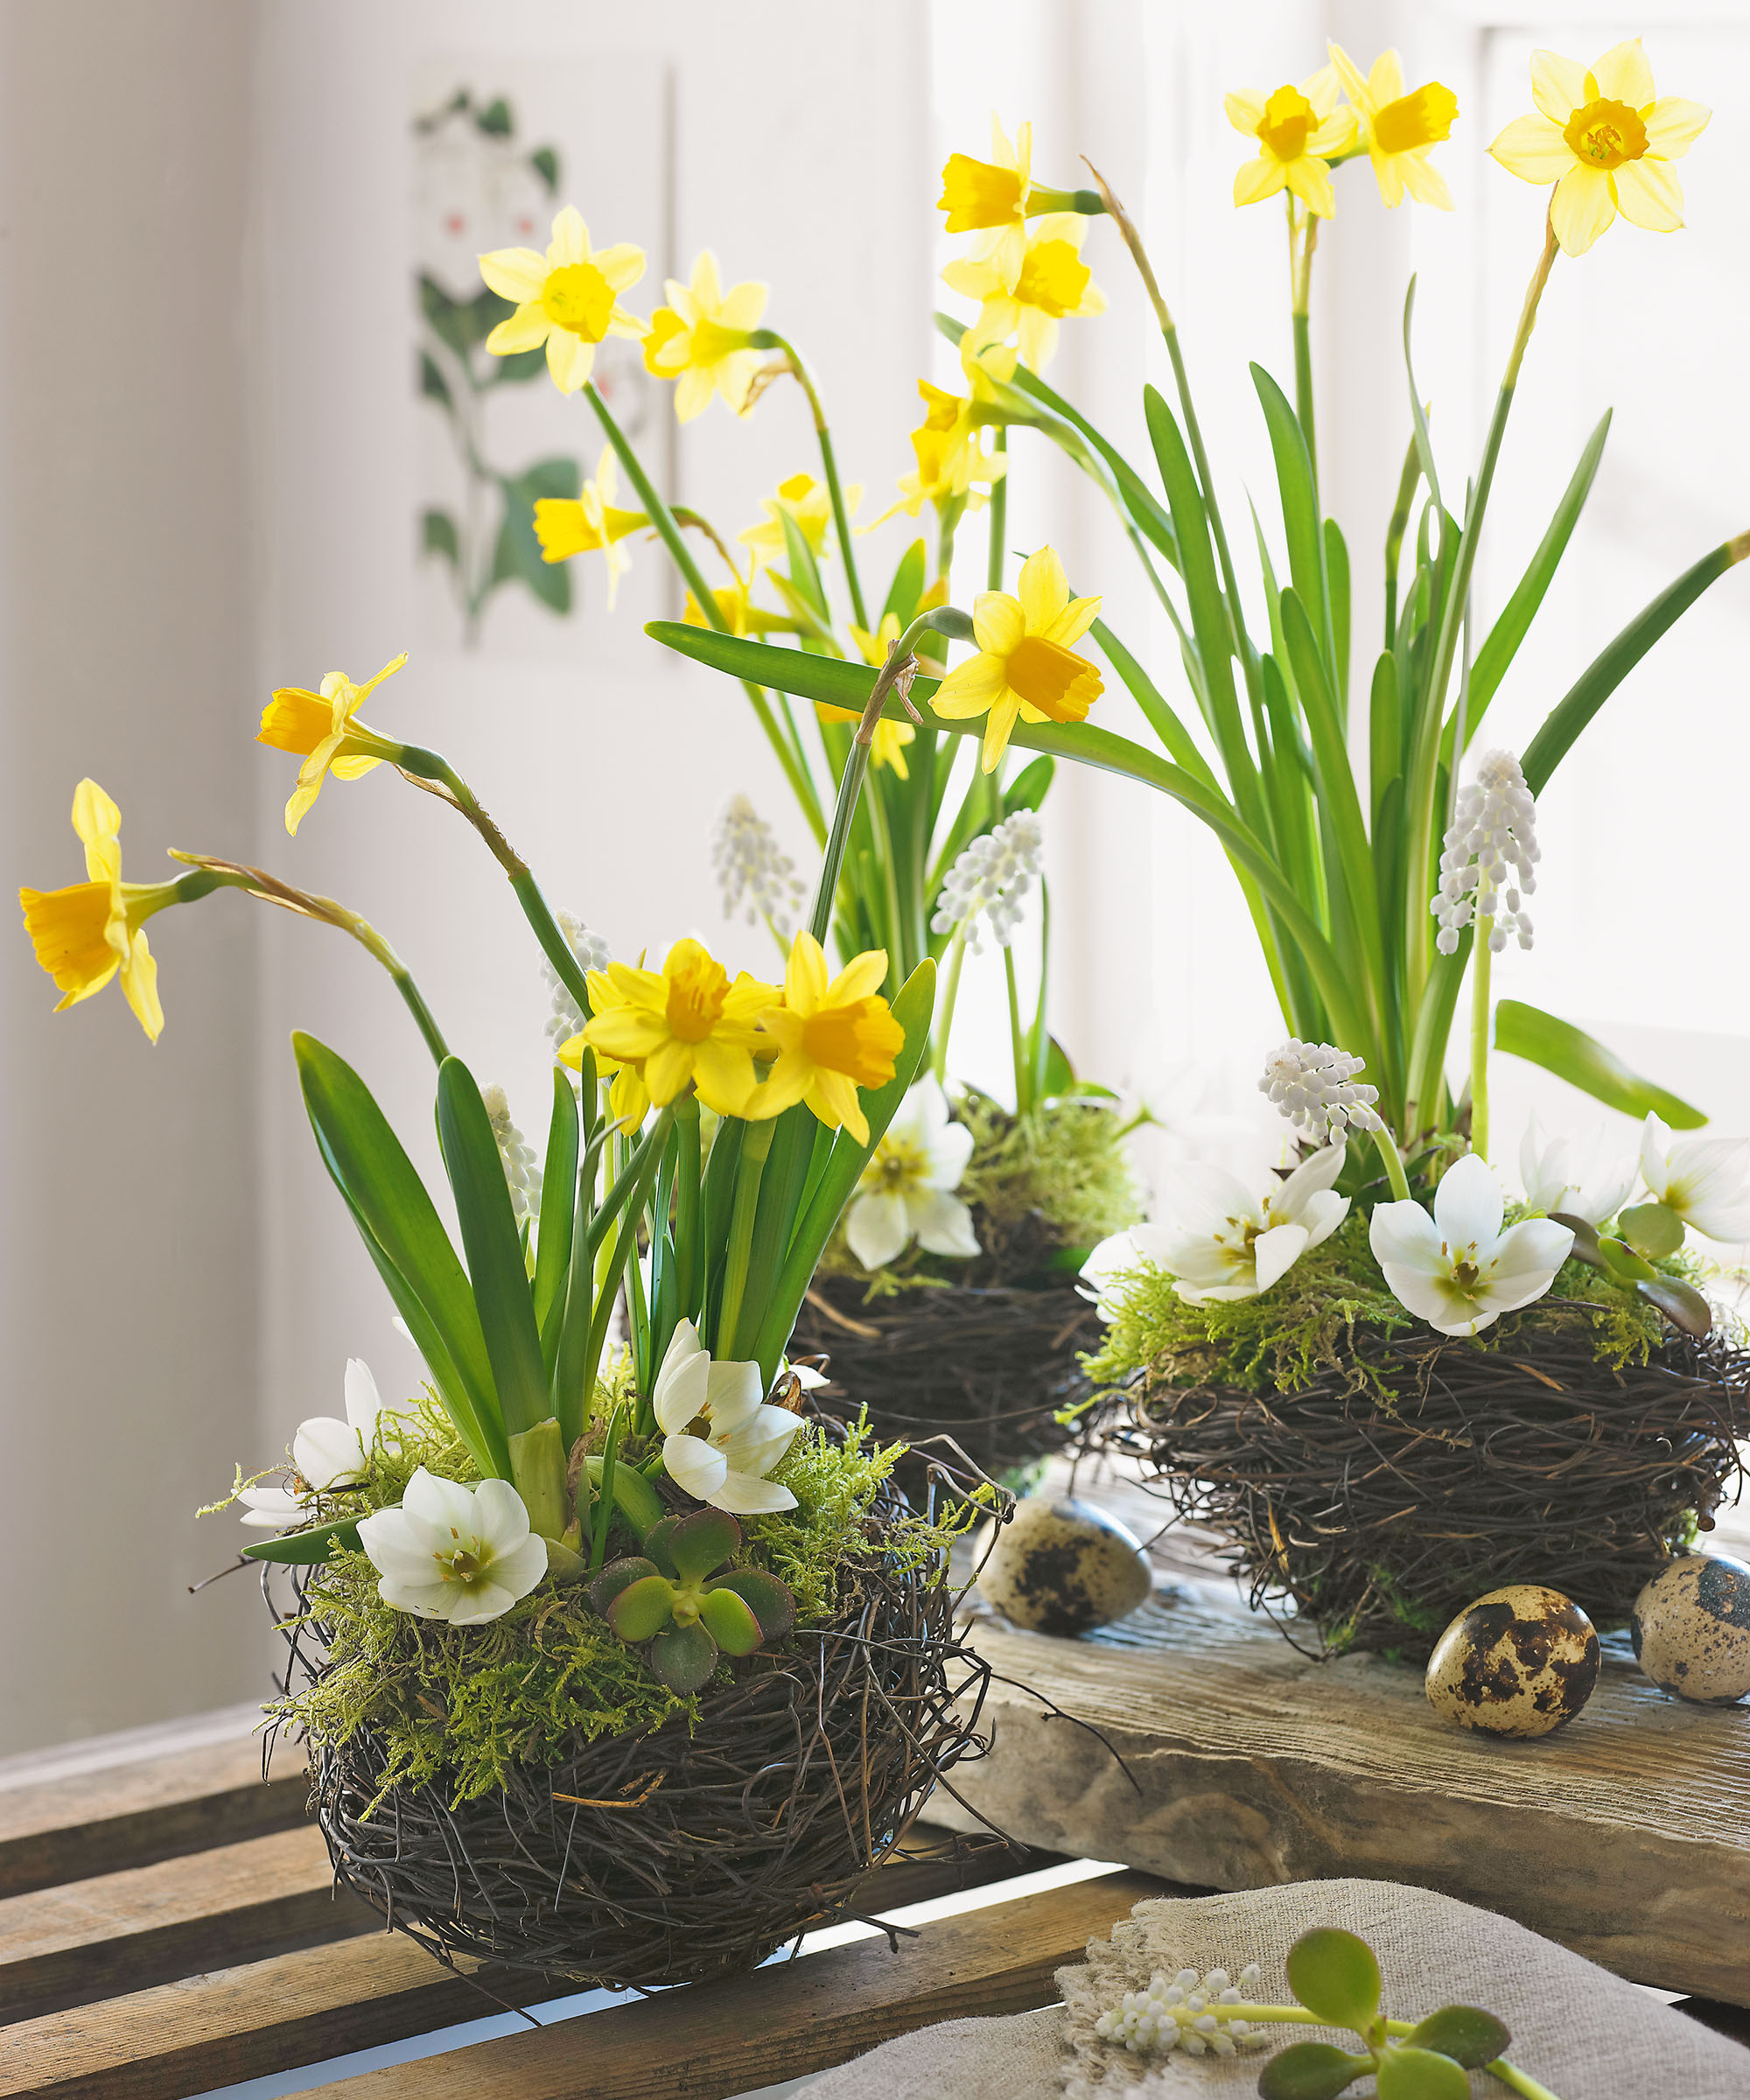 Mini nests, three small twig baskets planted with daffodils and anemones on a bench with brown eggs beside them